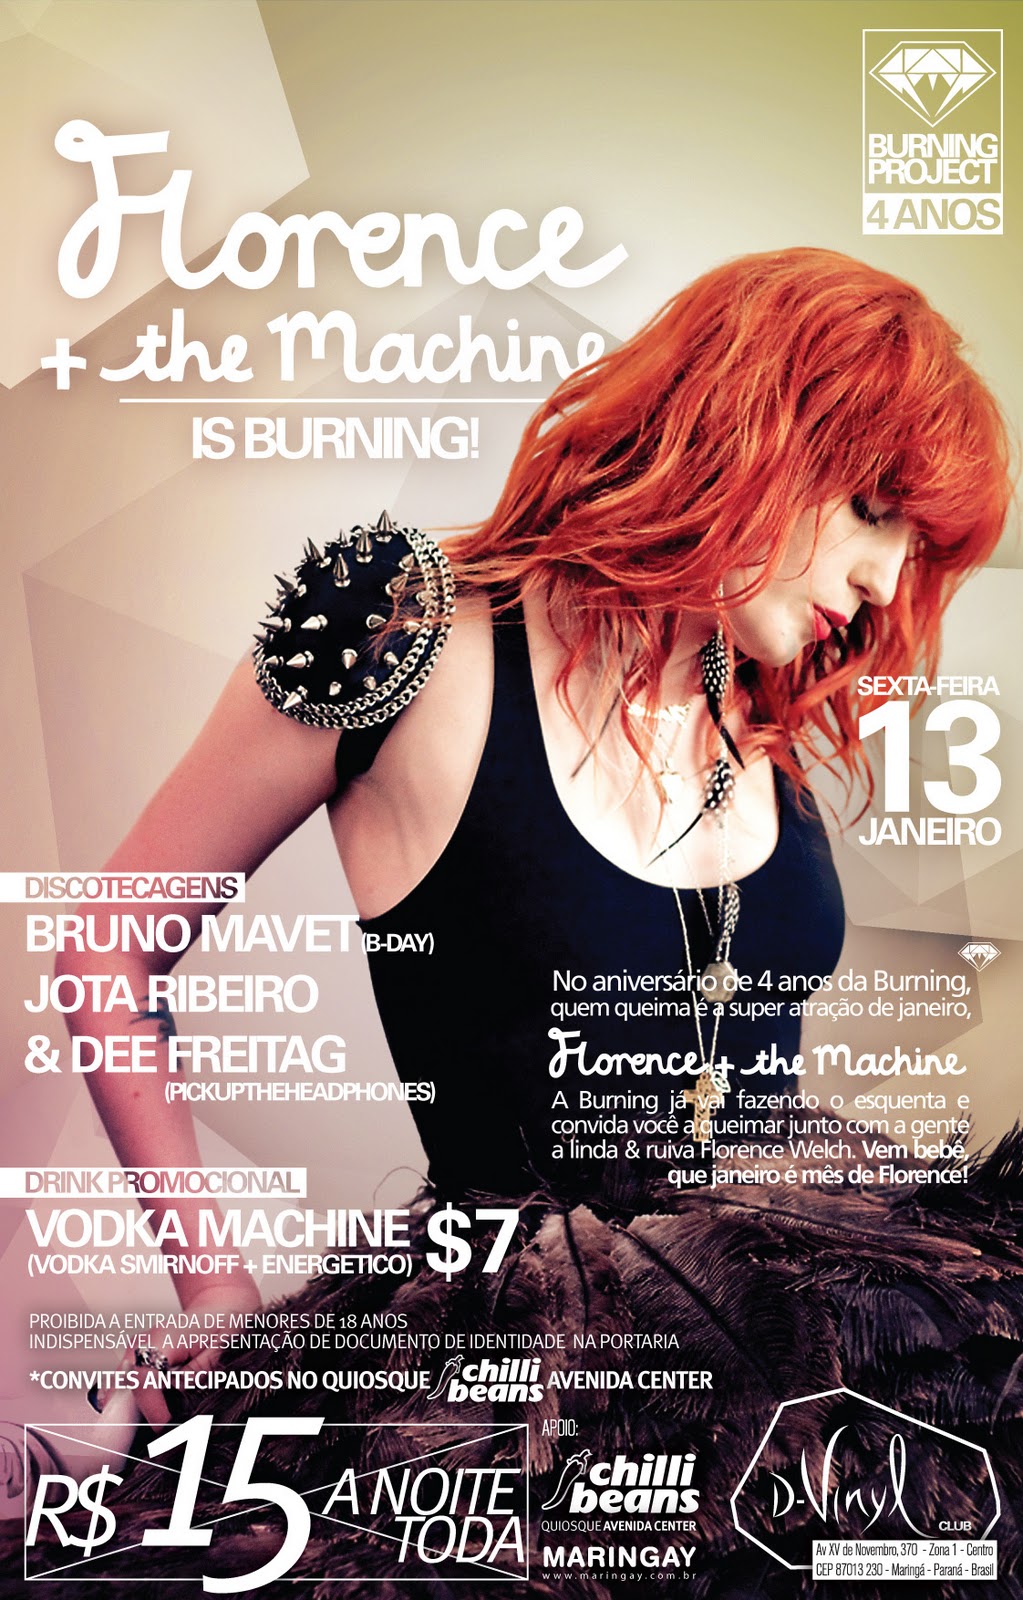 SEXTA-FEIRA (13/01): FLORENCE + THE MACHINE IS BURNING!